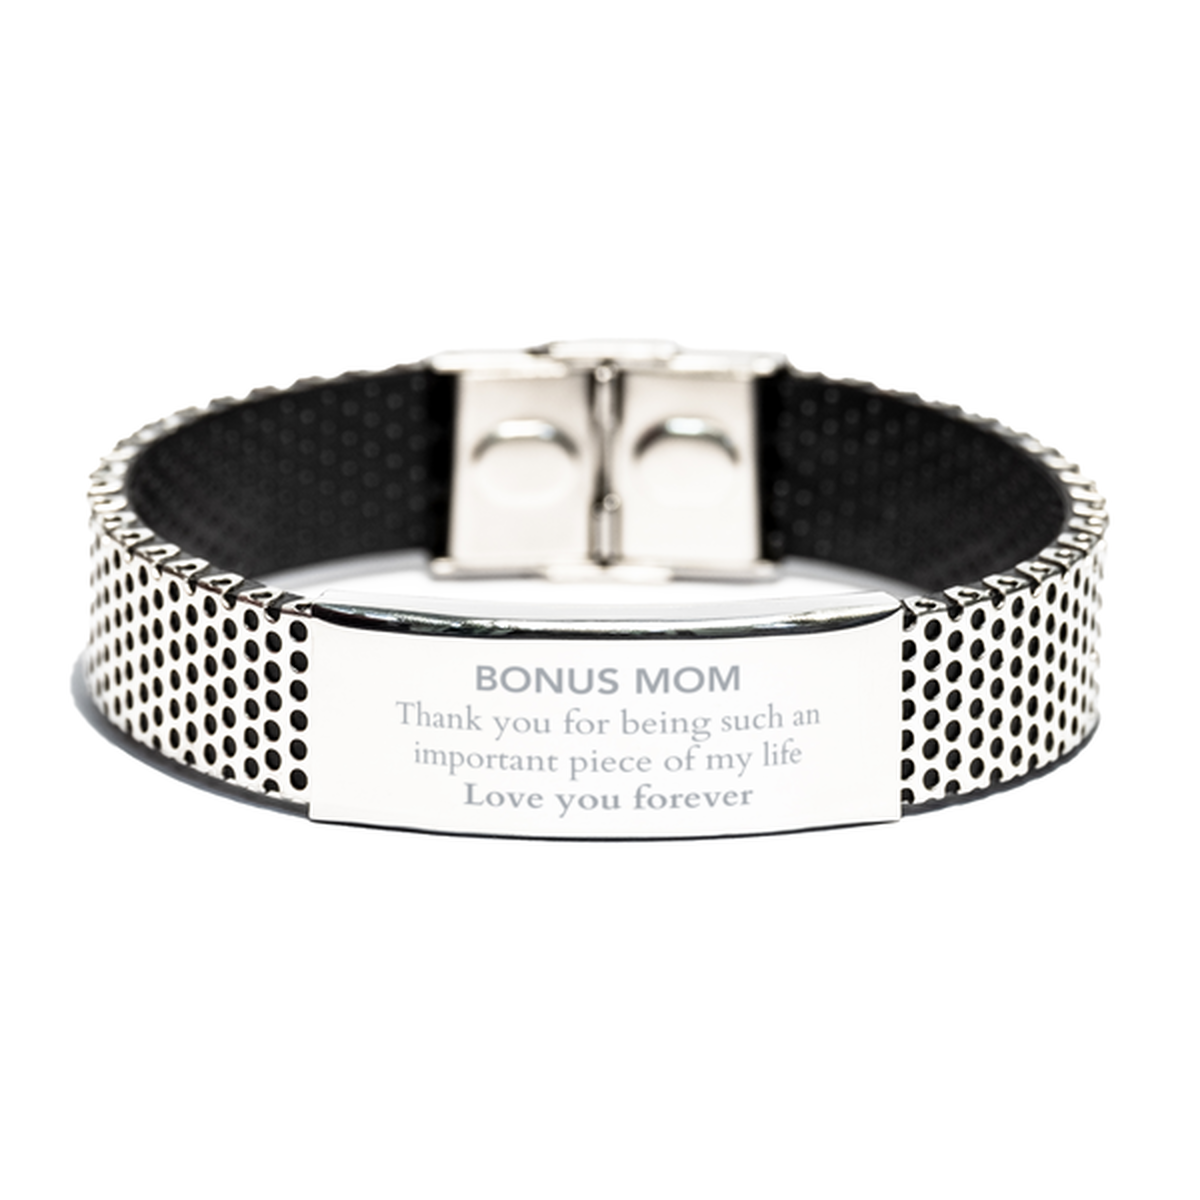 Appropriate Bonus Mom Stainless Steel Bracelet Epic Birthday Gifts for Bonus Mom Thank you for being such an important piece of my life Bonus Mom Christmas Mothers Fathers Day